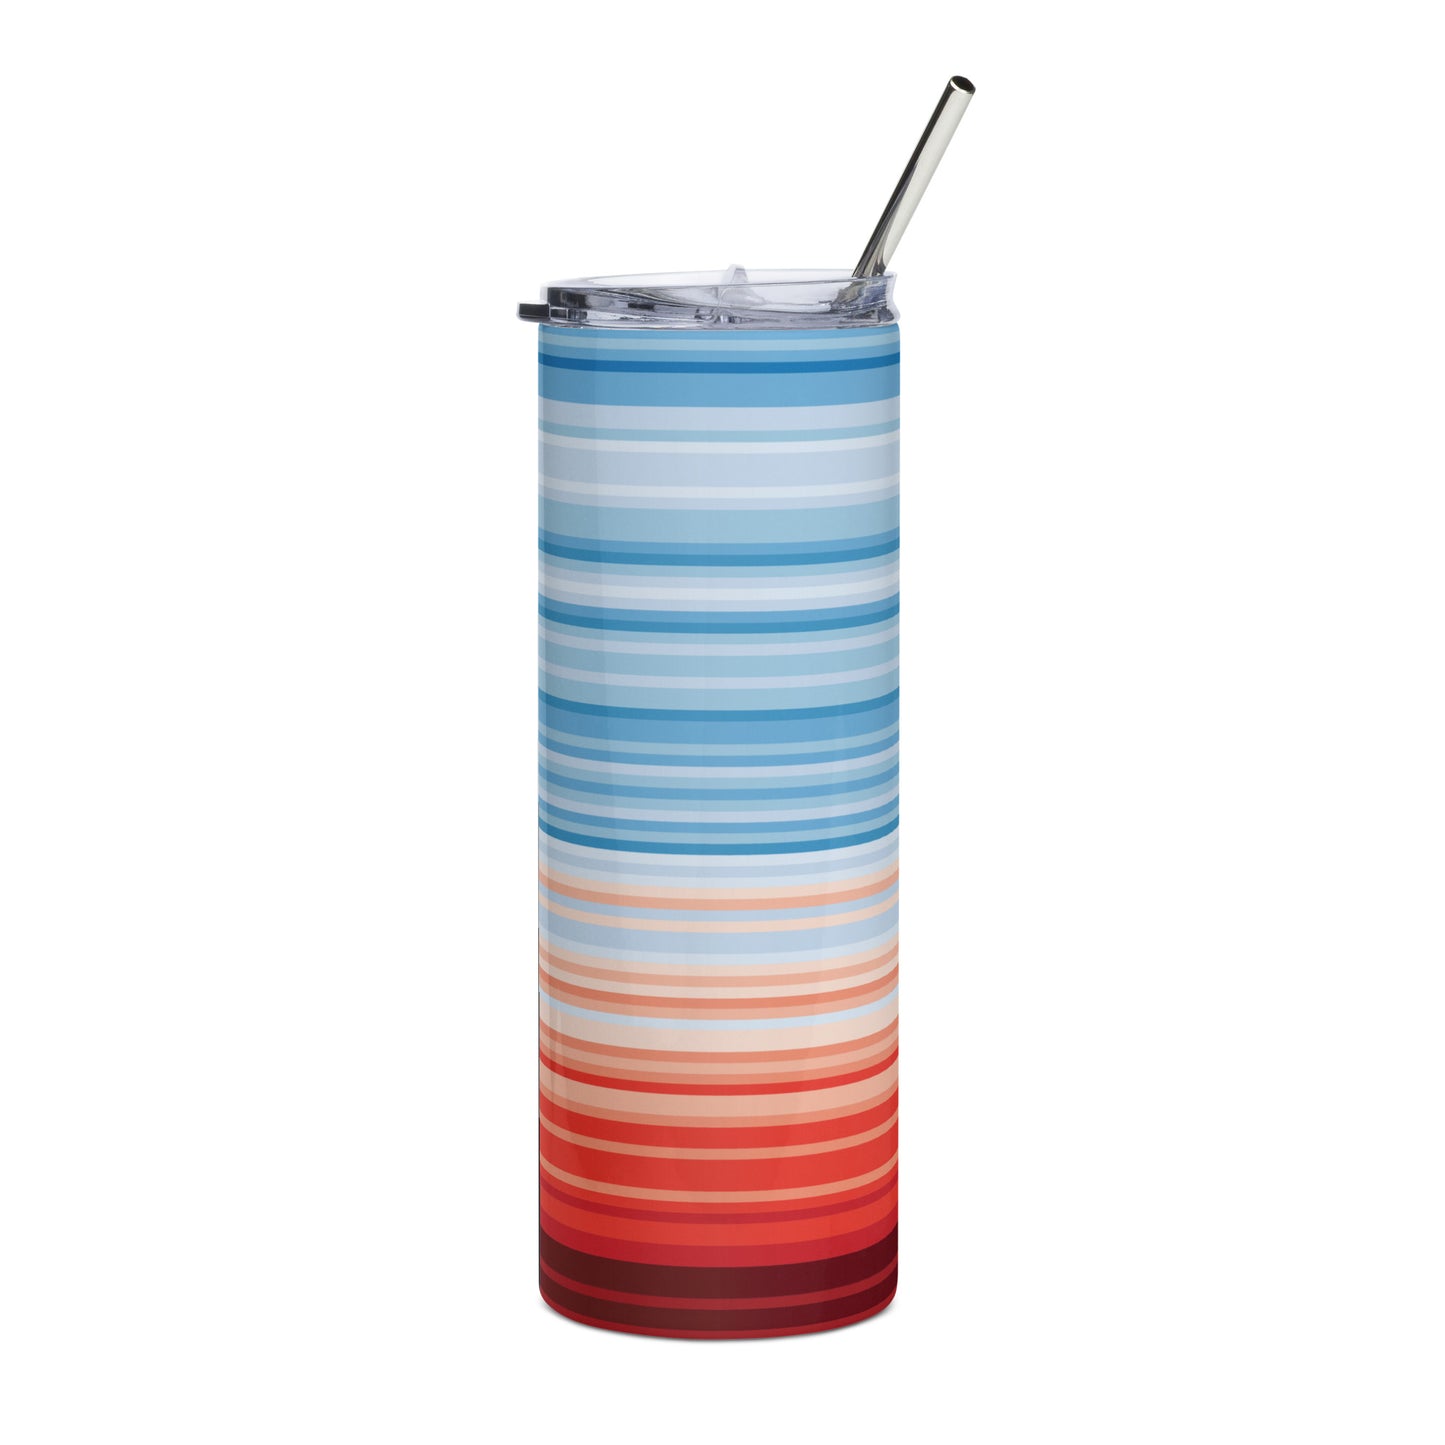 Climate Change Global Warming Stripes - Sustainably Made Stainless steel tumbler